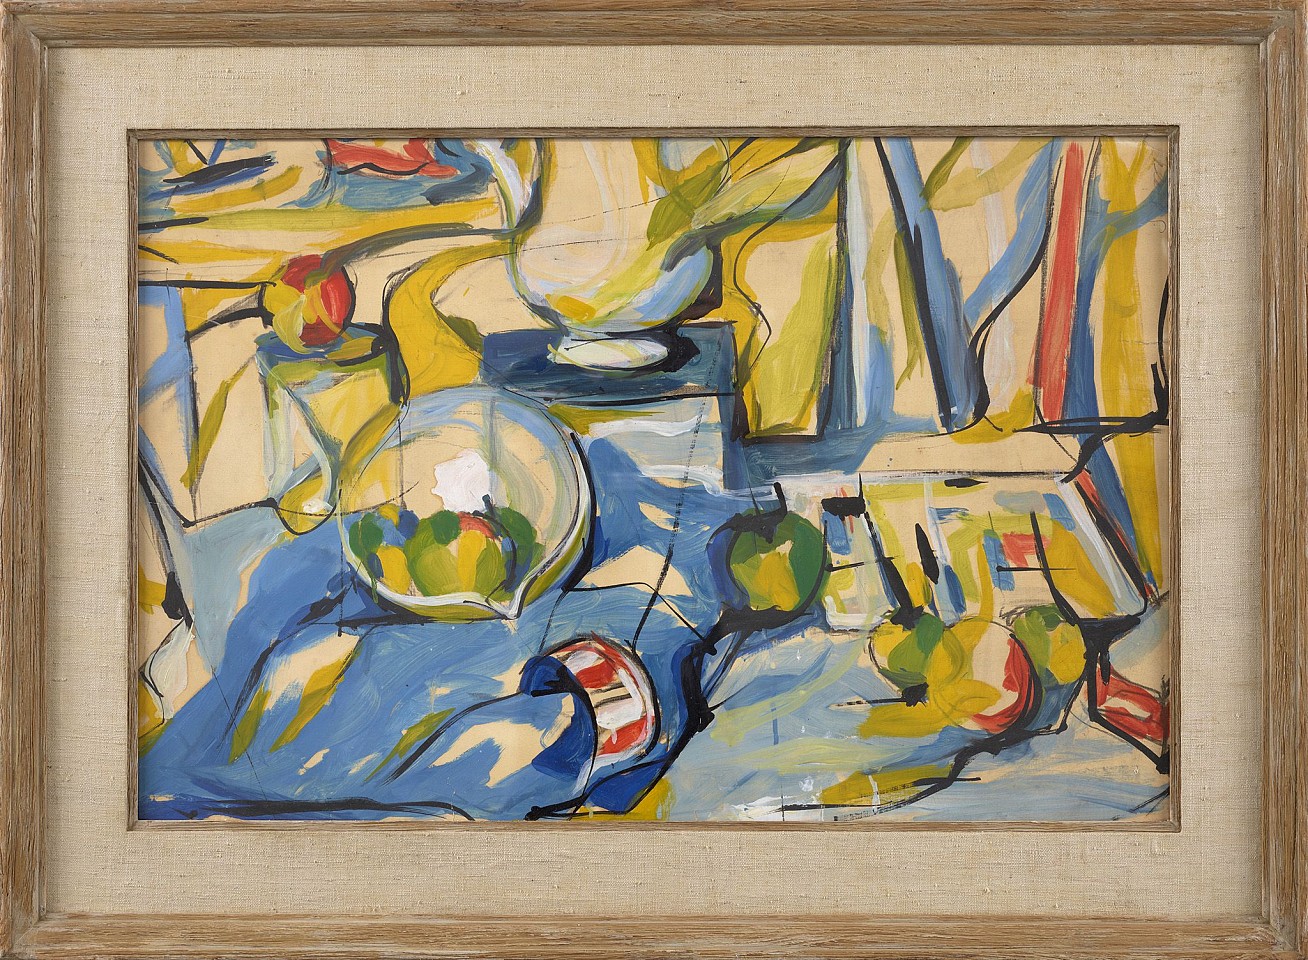 Pearl Angrist, Blue Forms, c. 1950
Oil on paper, 20 x 34 in. (50.8 x 86.4 cm)
ANG-00002